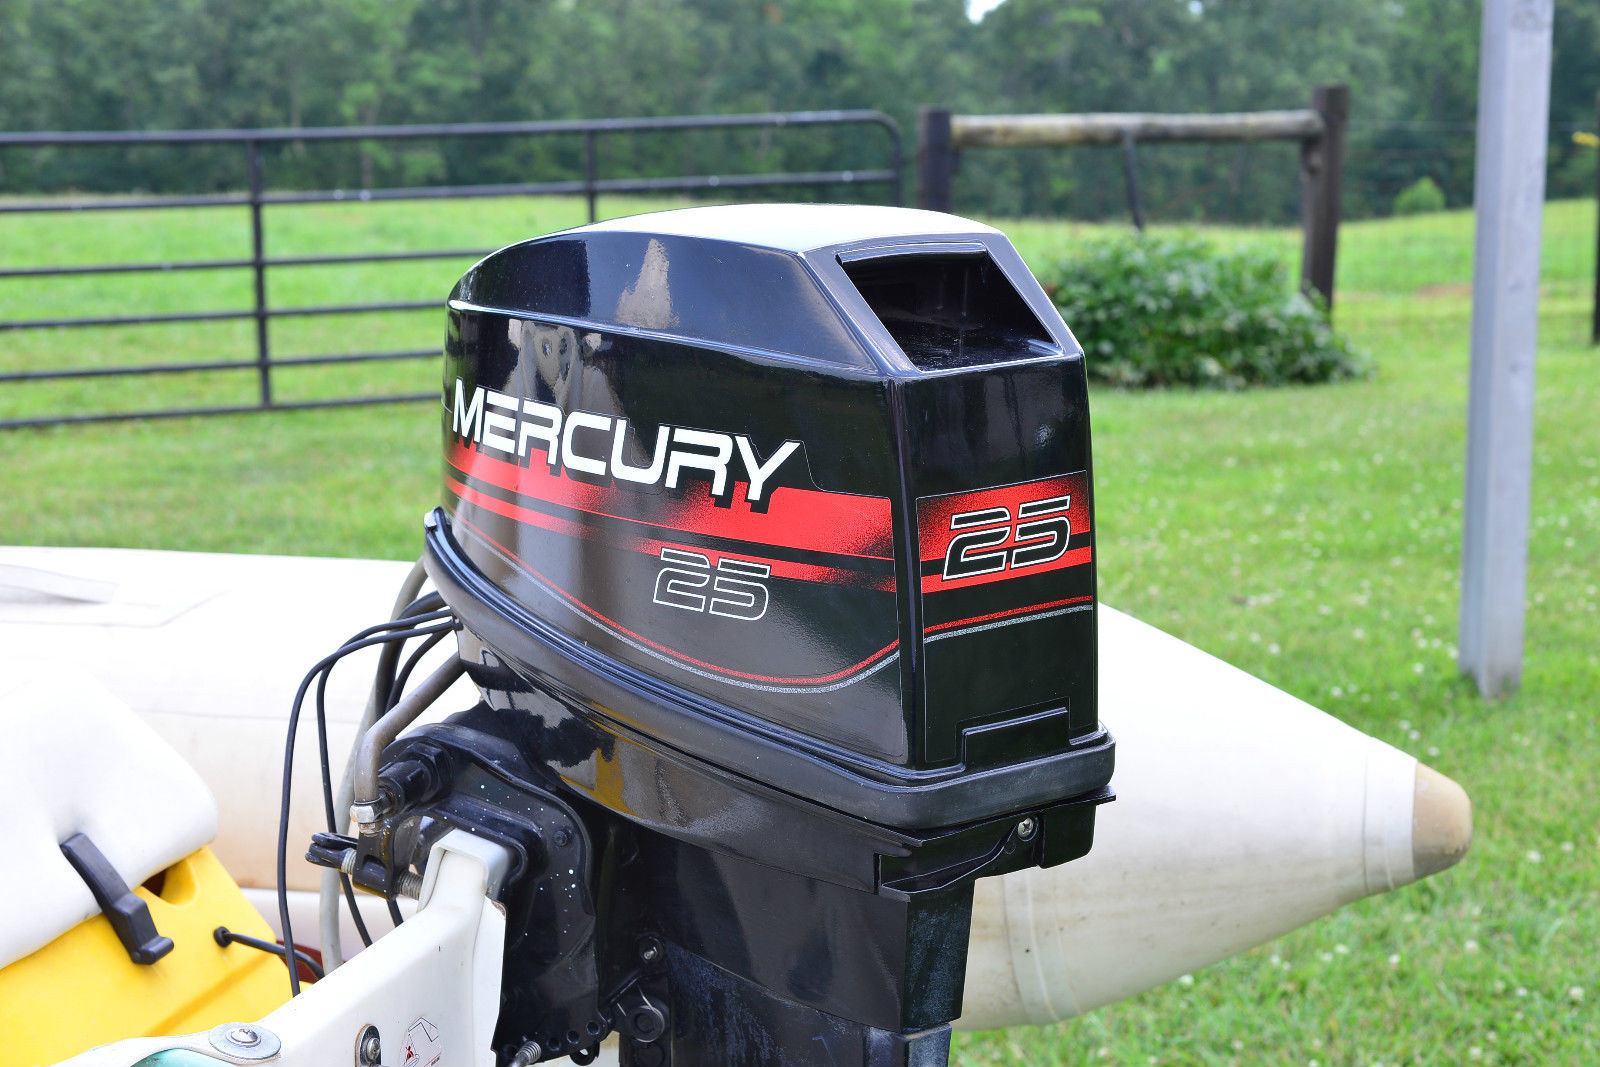 Mercury Marine Rhino Rider 1999 For Sale For 1 600 Boats From Usa Com